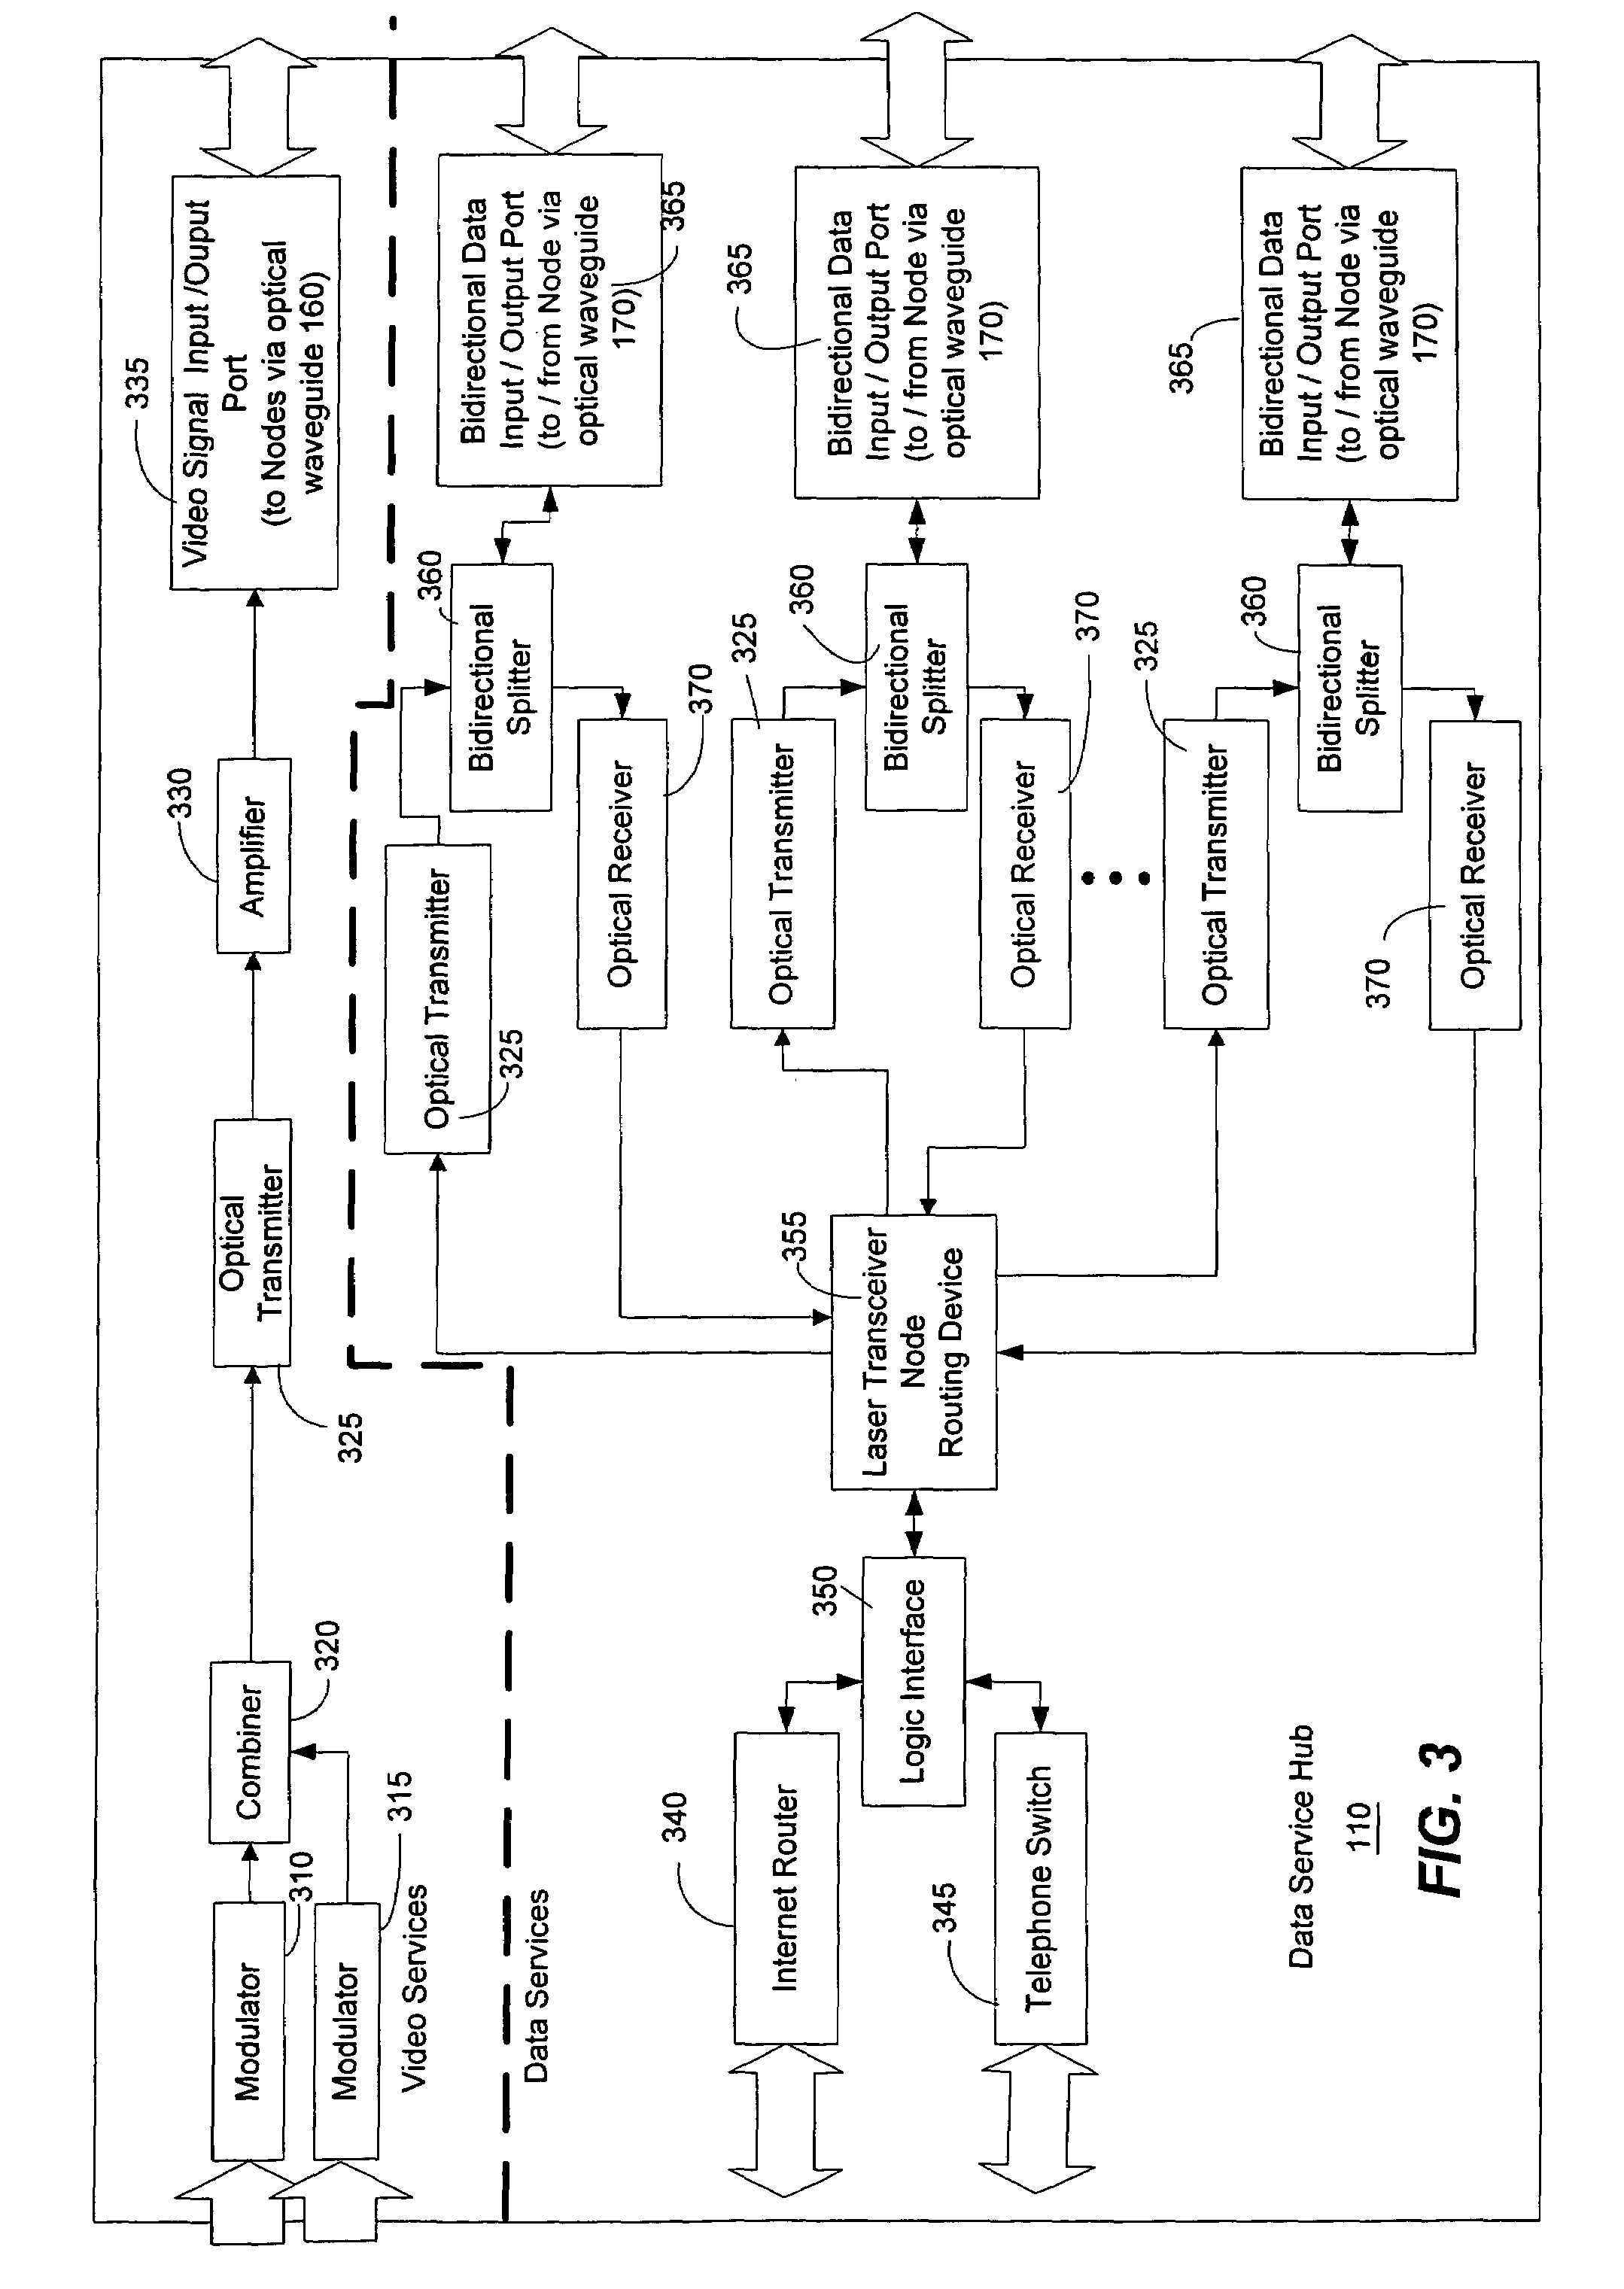 System and method for increasing upstream communication efficiency in an optical network